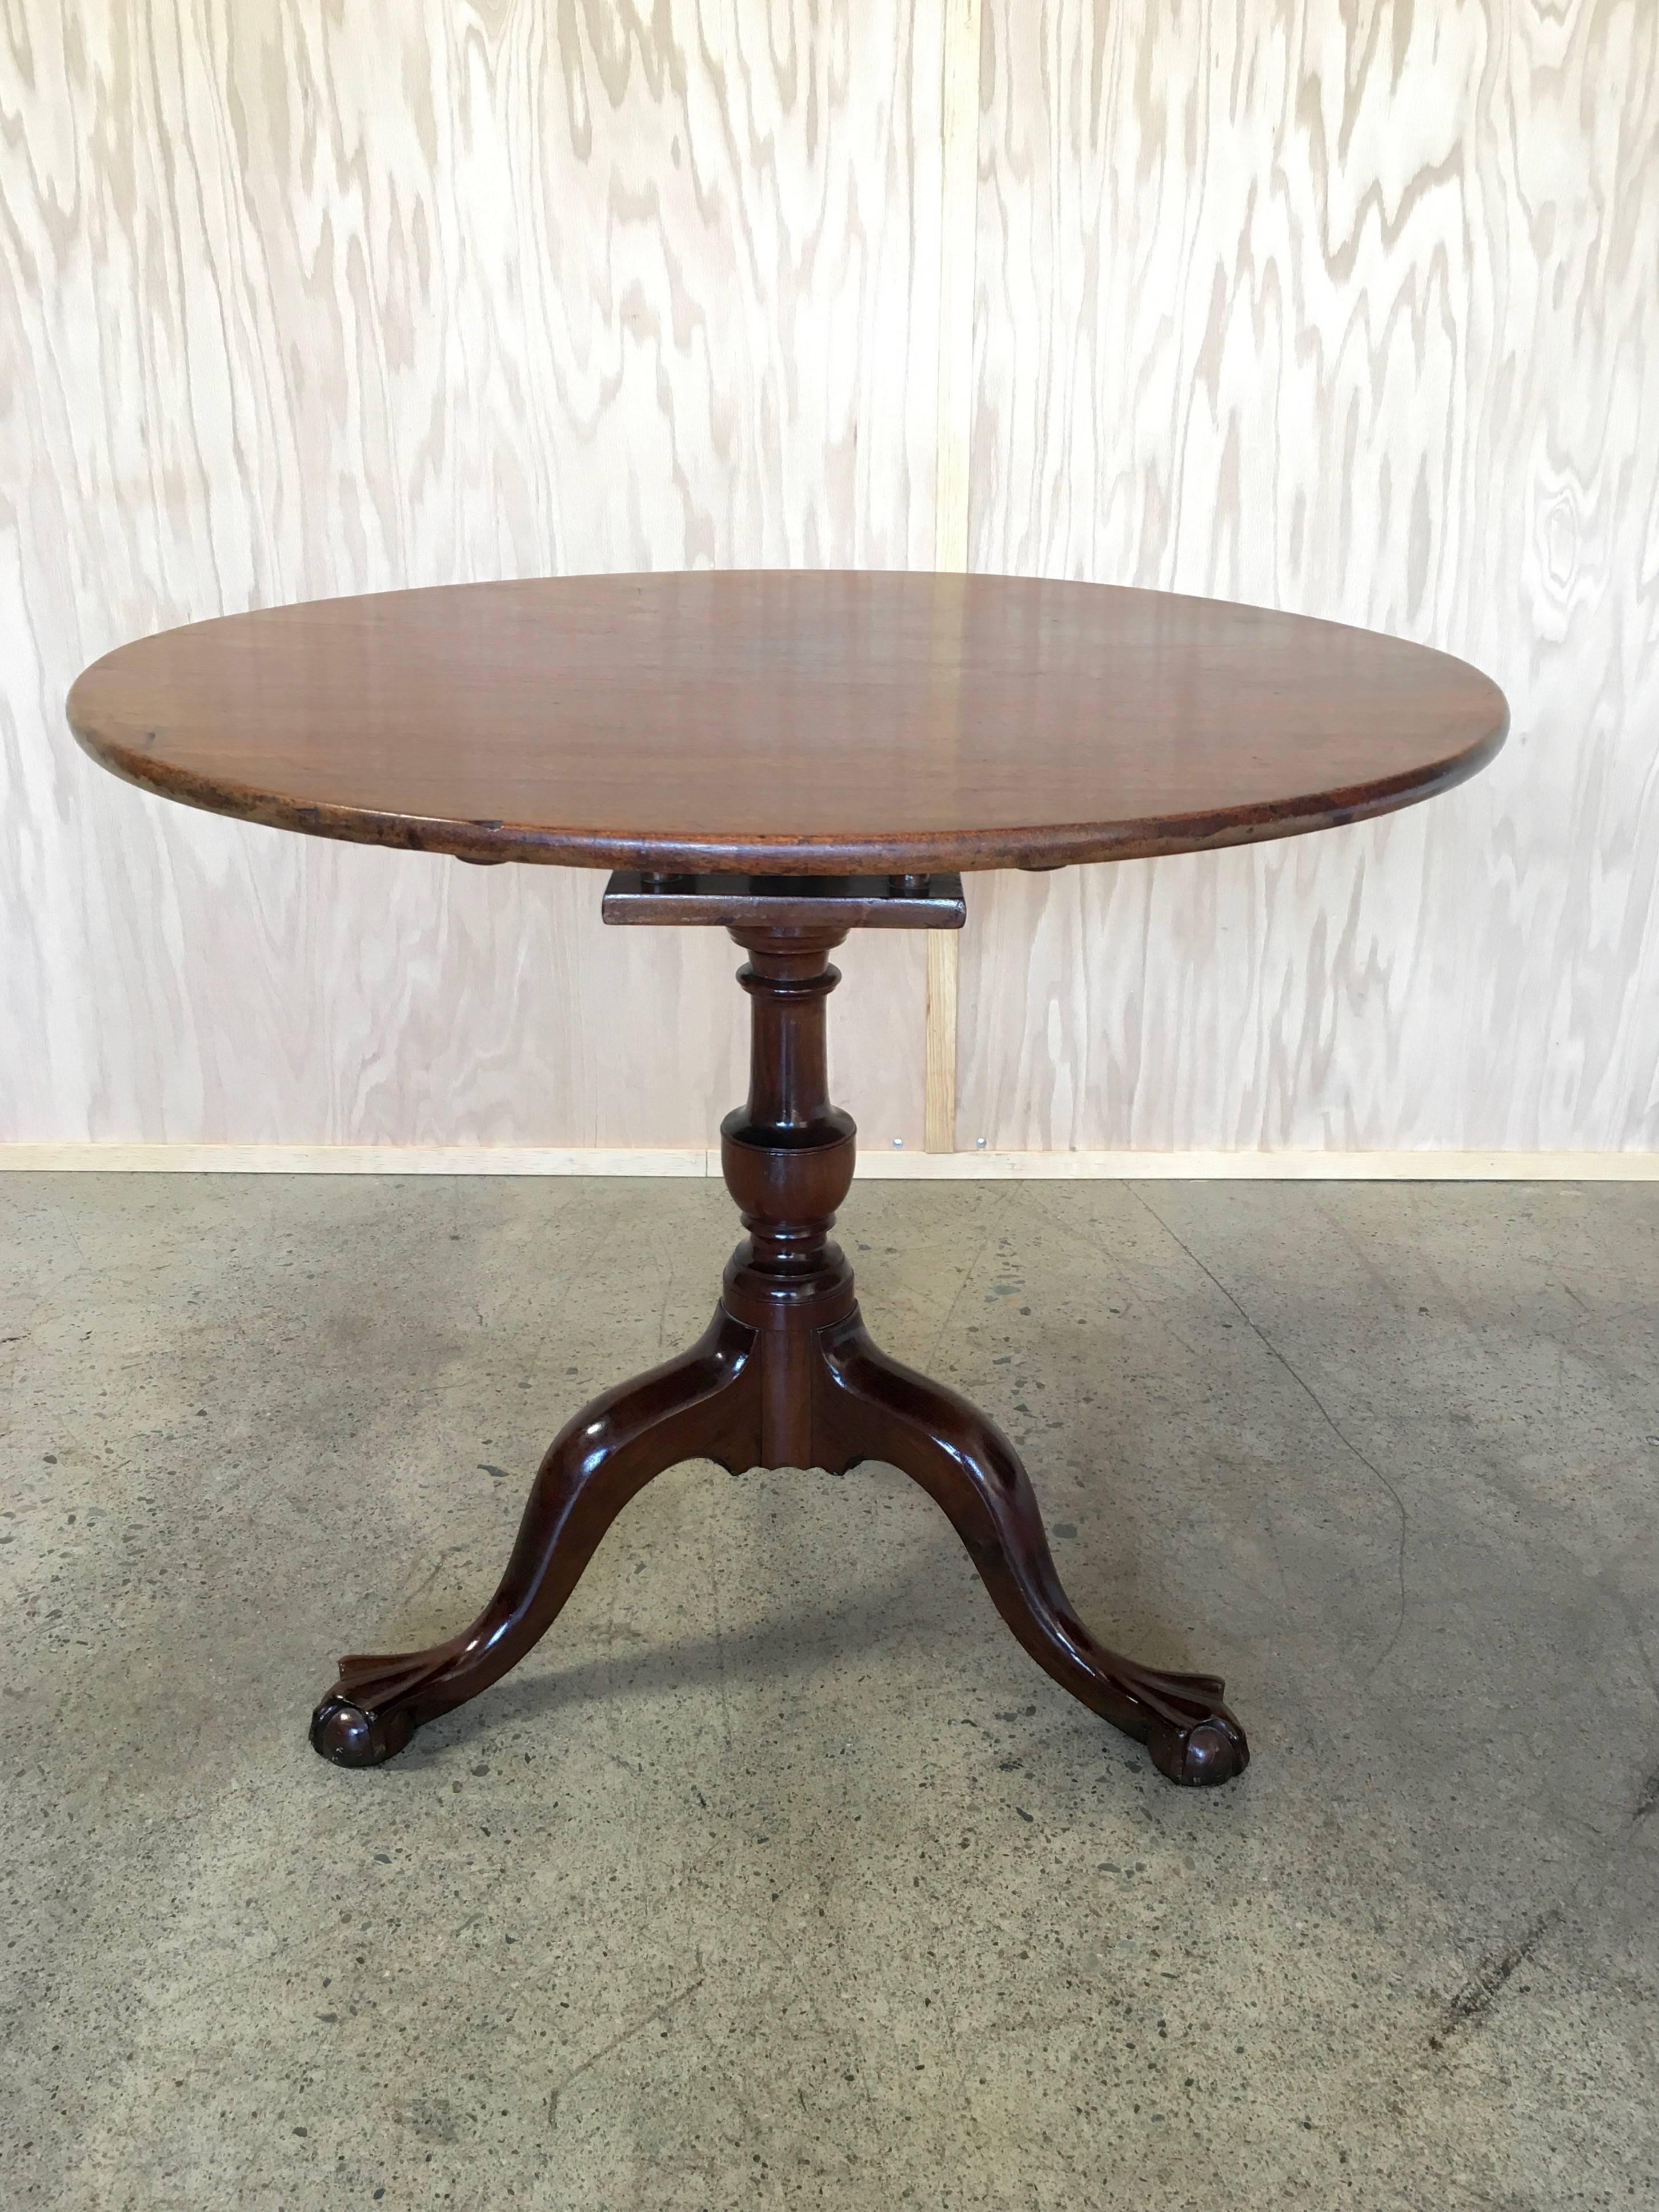  Antique 18th century Chippendale tilt-top table in Mahogany with bird cage and original spider bracket at the bottom. Refinished in the last 30 years.